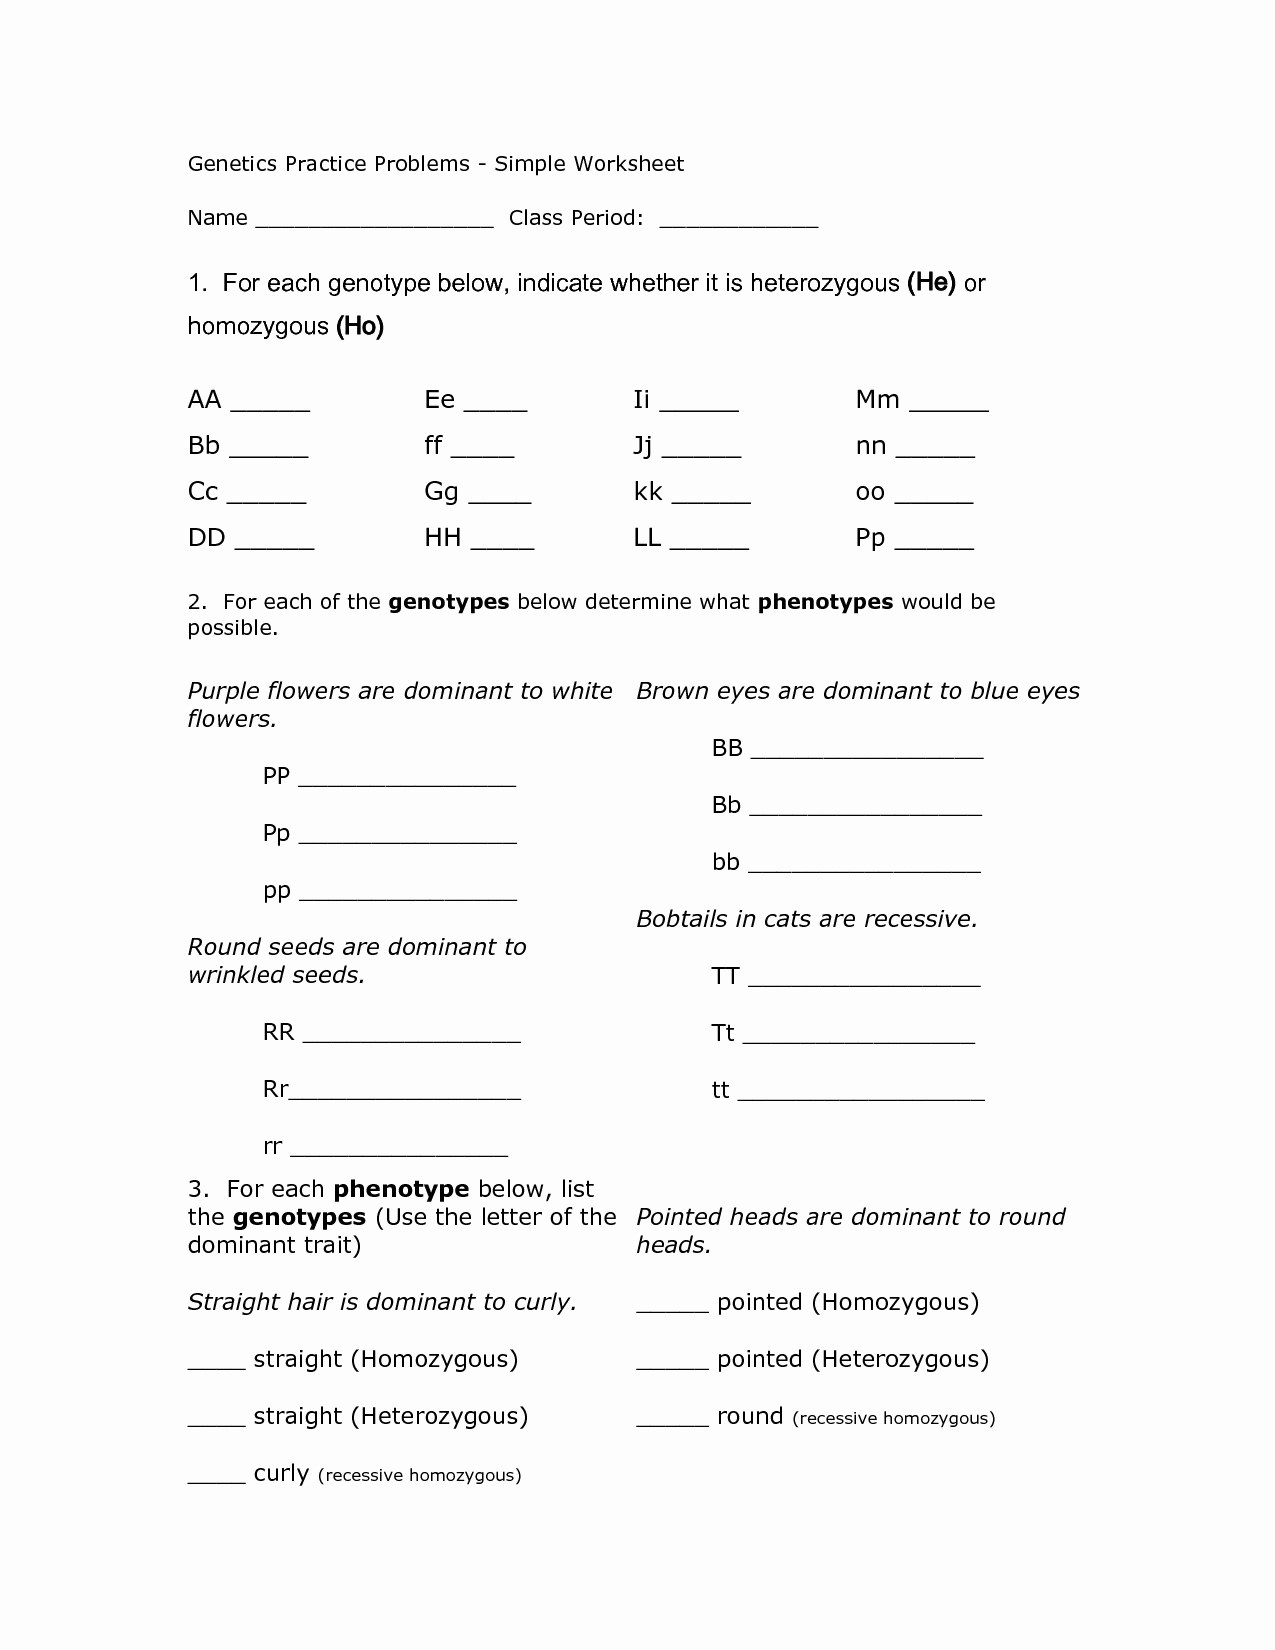 Genetics Practice Problems Worksheet Answers Inspirational 14 Best Of Genetics Problems Worksheet with Answer